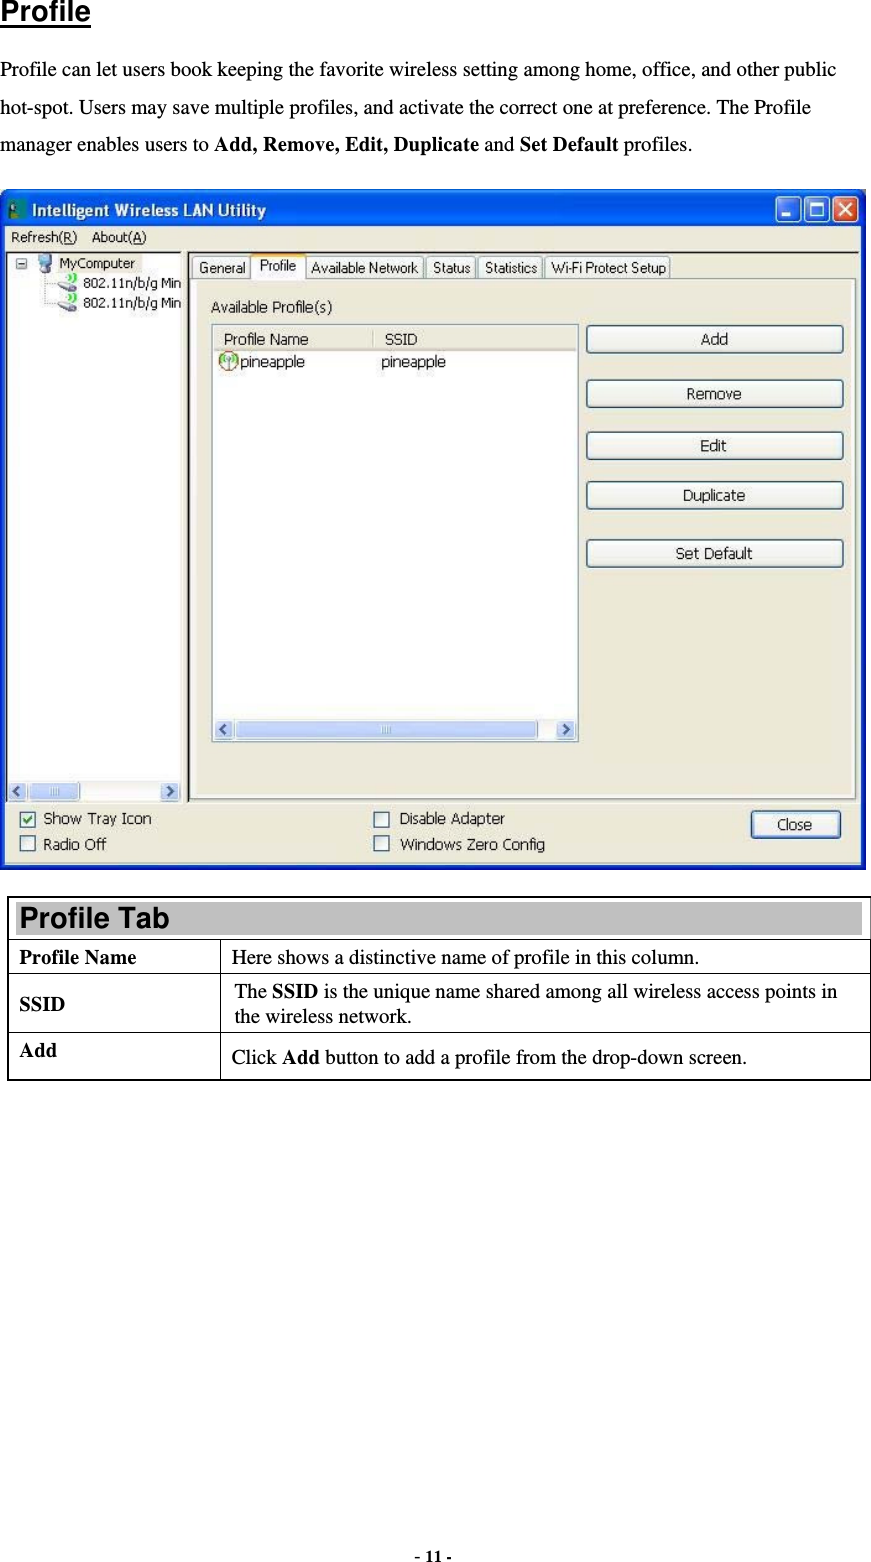  - 11 - Profile Profile can let users book keeping the favorite wireless setting among home, office, and other public hot-spot. Users may save multiple profiles, and activate the correct one at preference. The Profile manager enables users to Add, Remove, Edit, Duplicate and Set Default profiles.  Profile Tab Profile Name  Here shows a distinctive name of profile in this column. SSID  The SSID is the unique name shared among all wireless access points in the wireless network. Add  Click Add button to add a profile from the drop-down screen. 